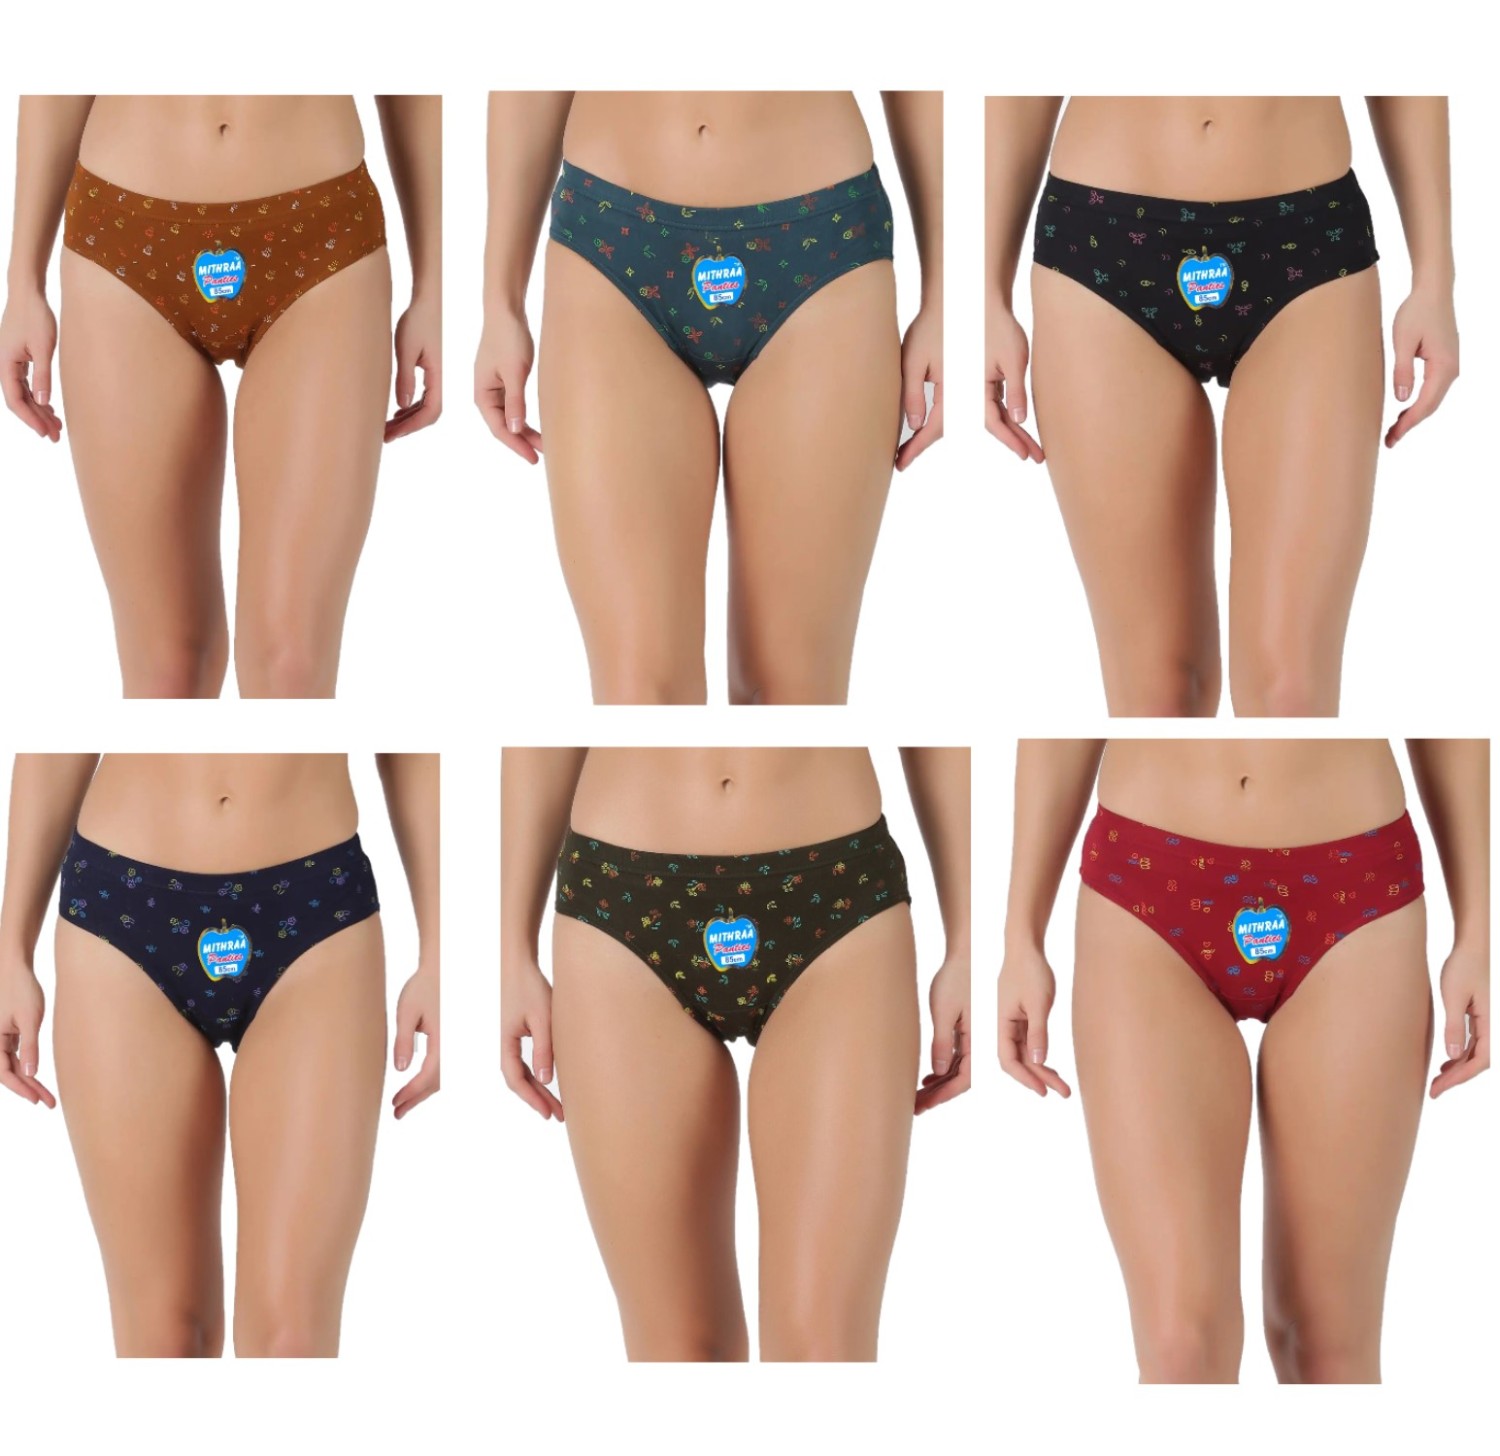 IPL Printed Cotton Panties (Combo Pack of 6) Assorted colors only